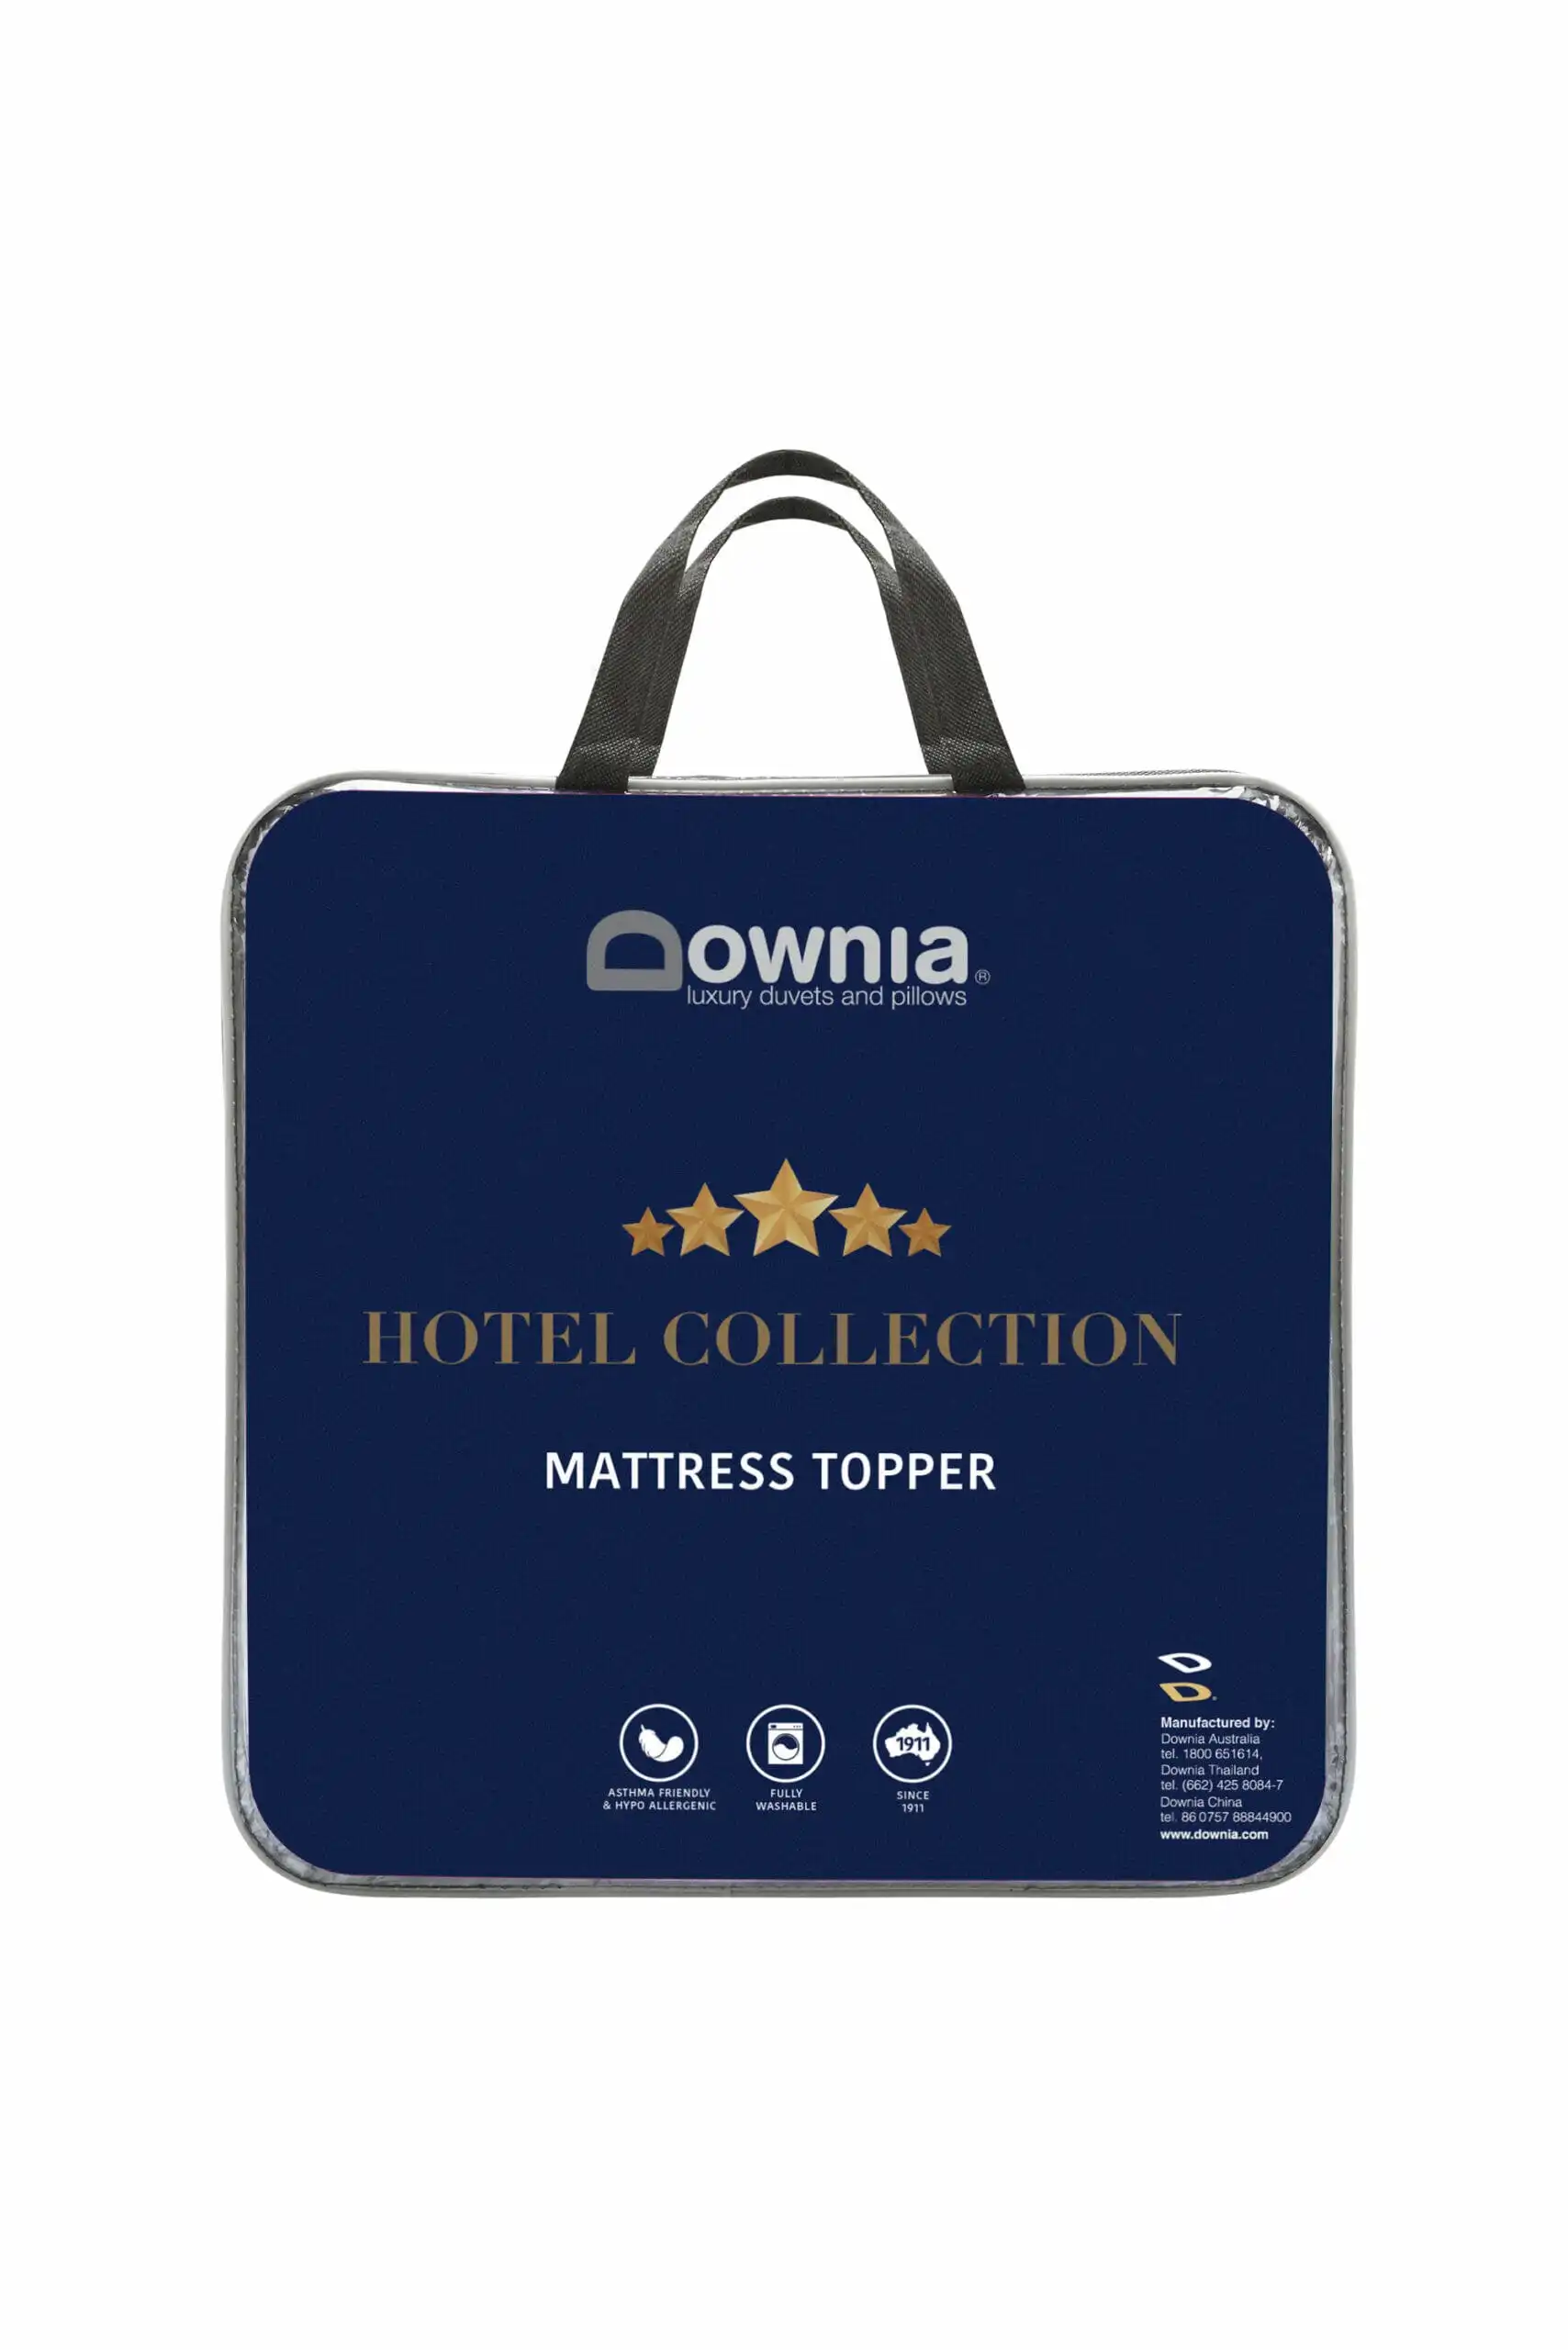 Downia 5 Star HOTEL COLLECTION Mattress Topper